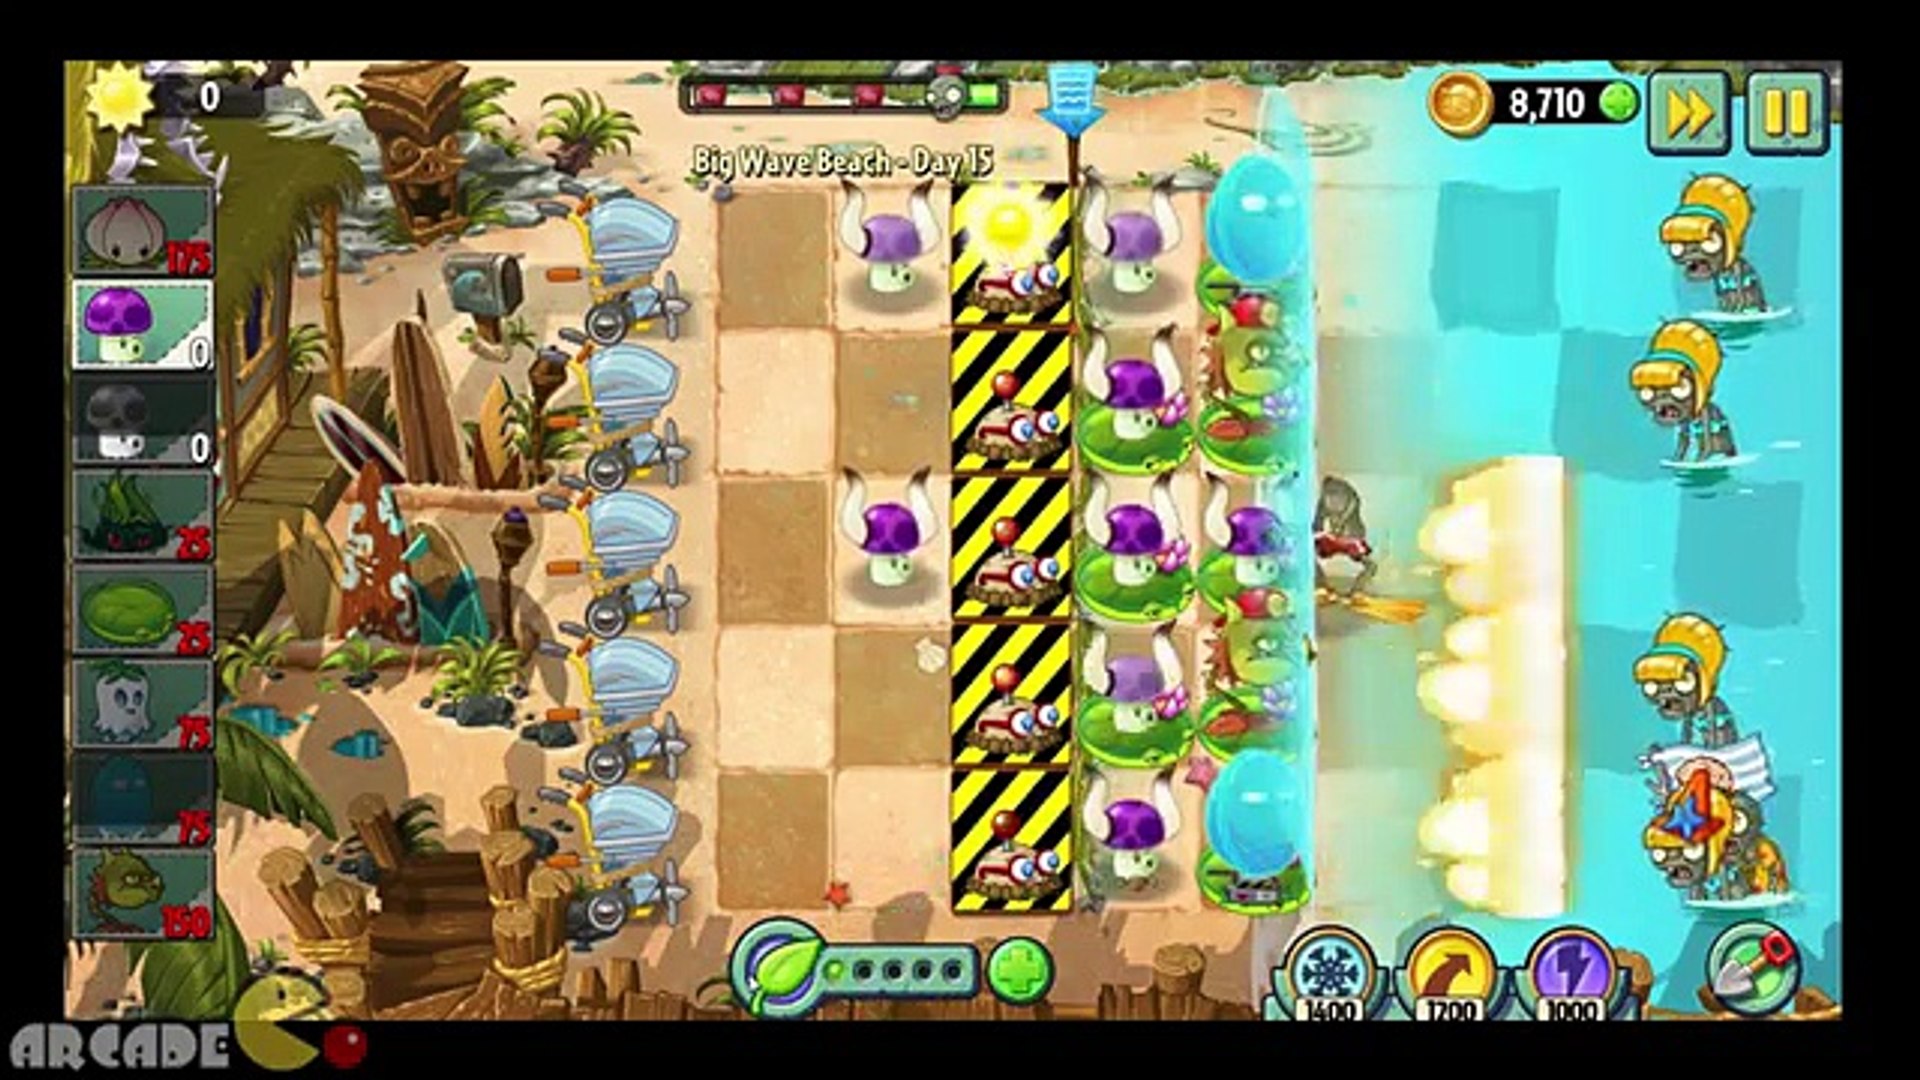 Plants Vs Zombies 2 Big Wave Beach Day 15 No Flower Use Extreme